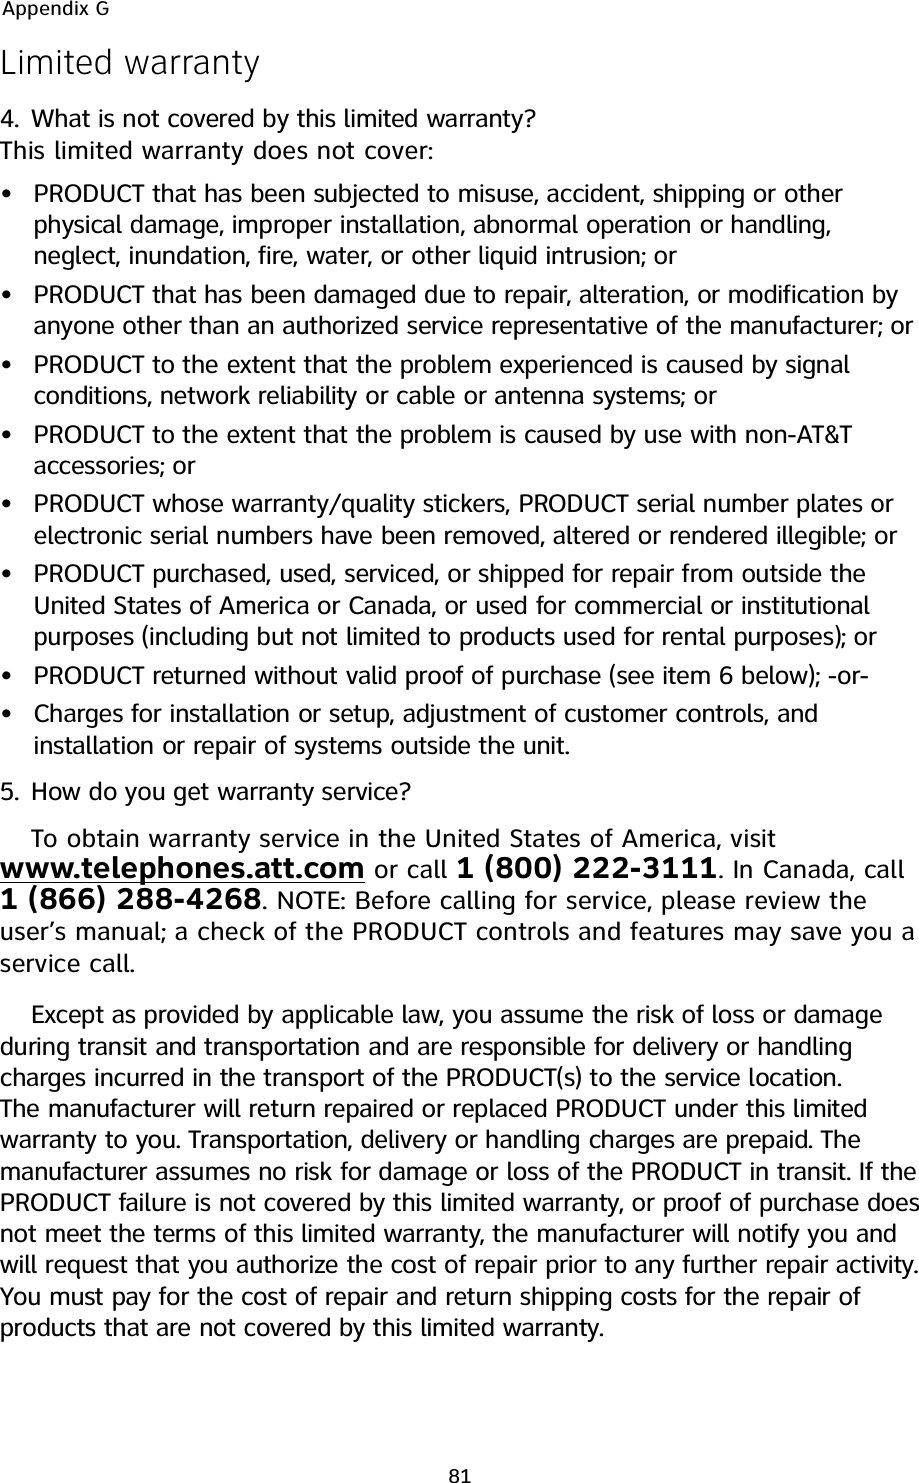 Limited warranty4. What is not covered by this limited warranty?This limited warranty does not cover:PRODUCT that has been subjected to misuse, accident, shipping or otherphysical damage, improper installation, abnormal operation or handling,neglect, inundation, fire, water, or other liquid intrusion; orPRODUCT that has been damaged due to repair, alteration, or modification byanyone other than an authorized service representative of the manufacturer; orPRODUCT to the extent that the problem experienced is caused by signalconditions, network reliability or cable or antenna systems; orPRODUCT to the extent that the problem is caused by use with non-AT&amp;Taccessories; orPRODUCT whose warranty/quality stickers, PRODUCT serial number plates orelectronic serial numbers have been removed, altered or rendered illegible; orPRODUCT purchased, used, serviced, or shipped for repair from outside theUnited States of America or Canada, or used for commercial or institutionalpurposes (including but not limited to products used for rental purposes); orPRODUCT returned without valid proof of purchase (see item 6 below); -or-Charges for installation or setup, adjustment of customer controls, andinstallation or repair of systems outside the unit.5. How do you get warranty service?To obtain warranty service in the United States of America, visitwww.telephones.att.com or call 1 (800) 222-3111. In Canada, call1 (866) 288-4268. NOTE: Before calling for service, please review theuser’s manual; a check of the PRODUCT controls and features may save you aservice call.Except as provided by applicable law, you assume the risk of loss or damageduring transit and transportation and are responsible for delivery or handlingcharges incurred in the transport of the PRODUCT(s) to the service location.The manufacturer will return repaired or replaced PRODUCT under this limitedwarranty to you. Transportation, delivery or handling charges are prepaid. Themanufacturer assumes no risk for damage or loss of the PRODUCT in transit. If thePRODUCT failure is not covered by this limited warranty, or proof of purchase doesnot meet the terms of this limited warranty, the manufacturer will notify you andwill request that you authorize the cost of repair prior to any further repair activity.You must pay for the cost of repair and return shipping costs for the repair ofproducts that are not covered by this limited warranty.••••••••Appendix G81